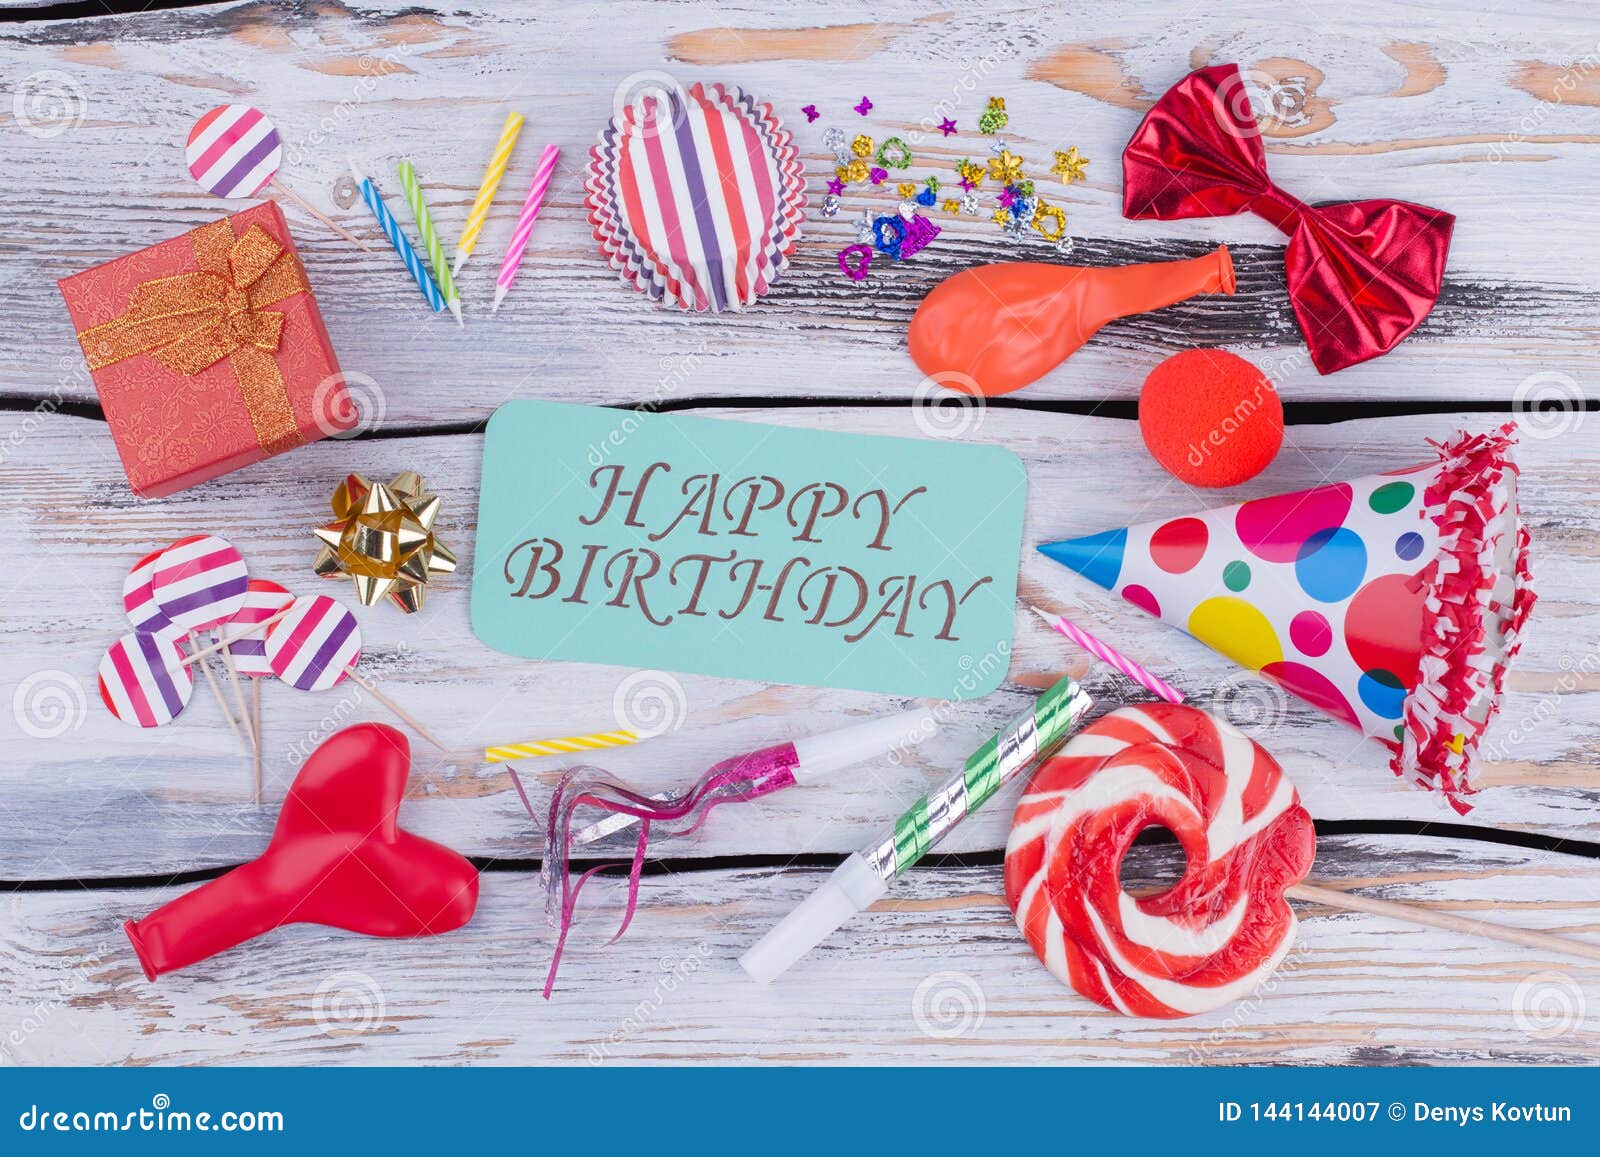 Happy Birthday Background with Party Items. Stock Image - Image of ...